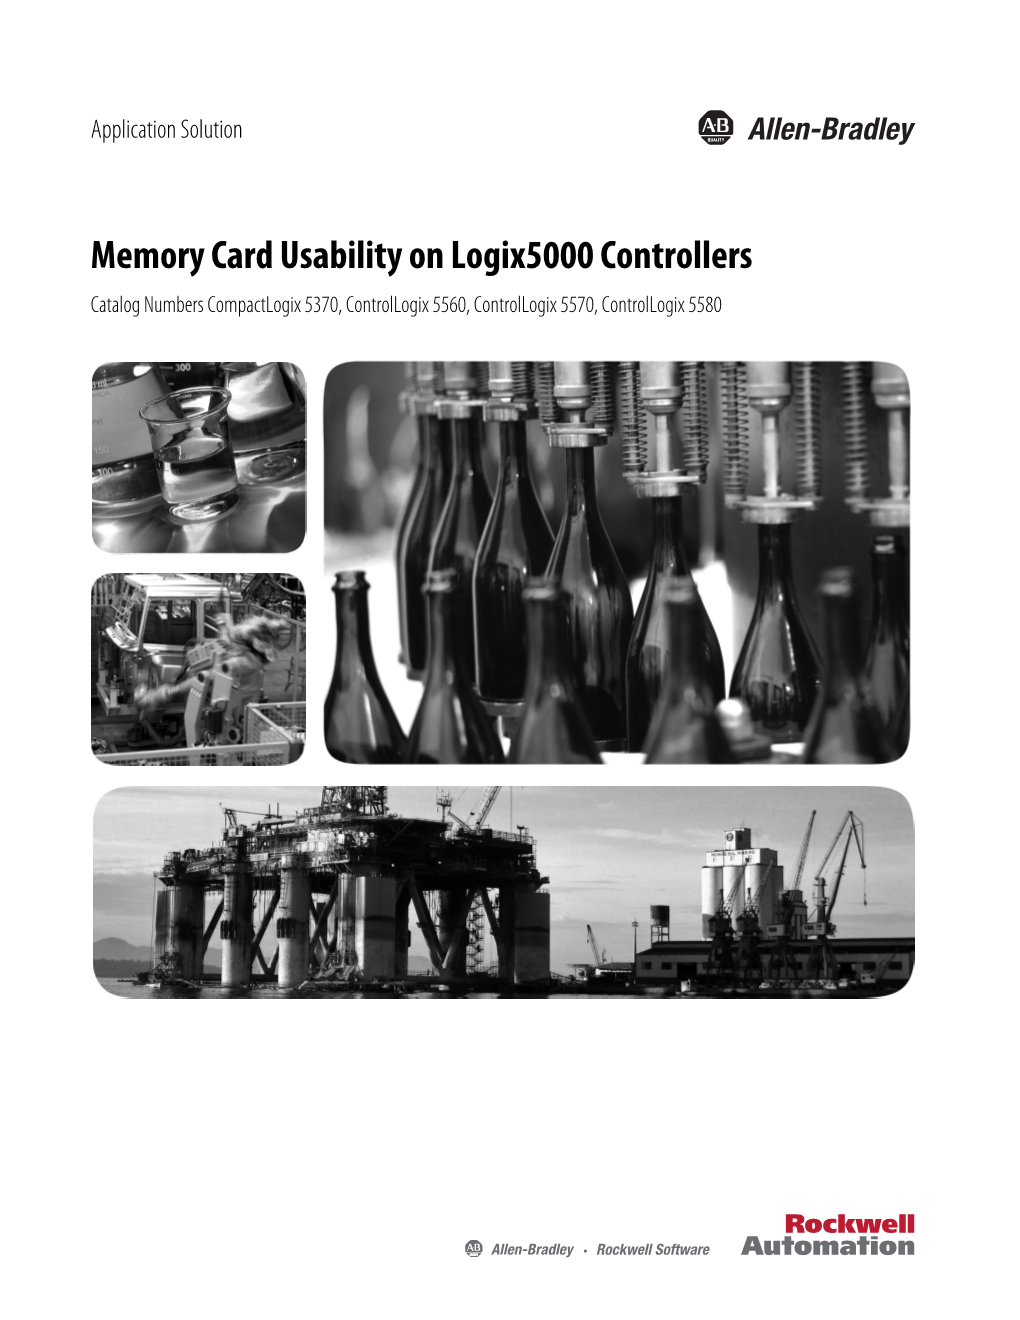 Memory Card Usability on Logix5000 Controllers Catalog Numbers Compactlogix 5370, Controllogix 5560, Controllogix 5570, Controllogix 5580 Important User Information